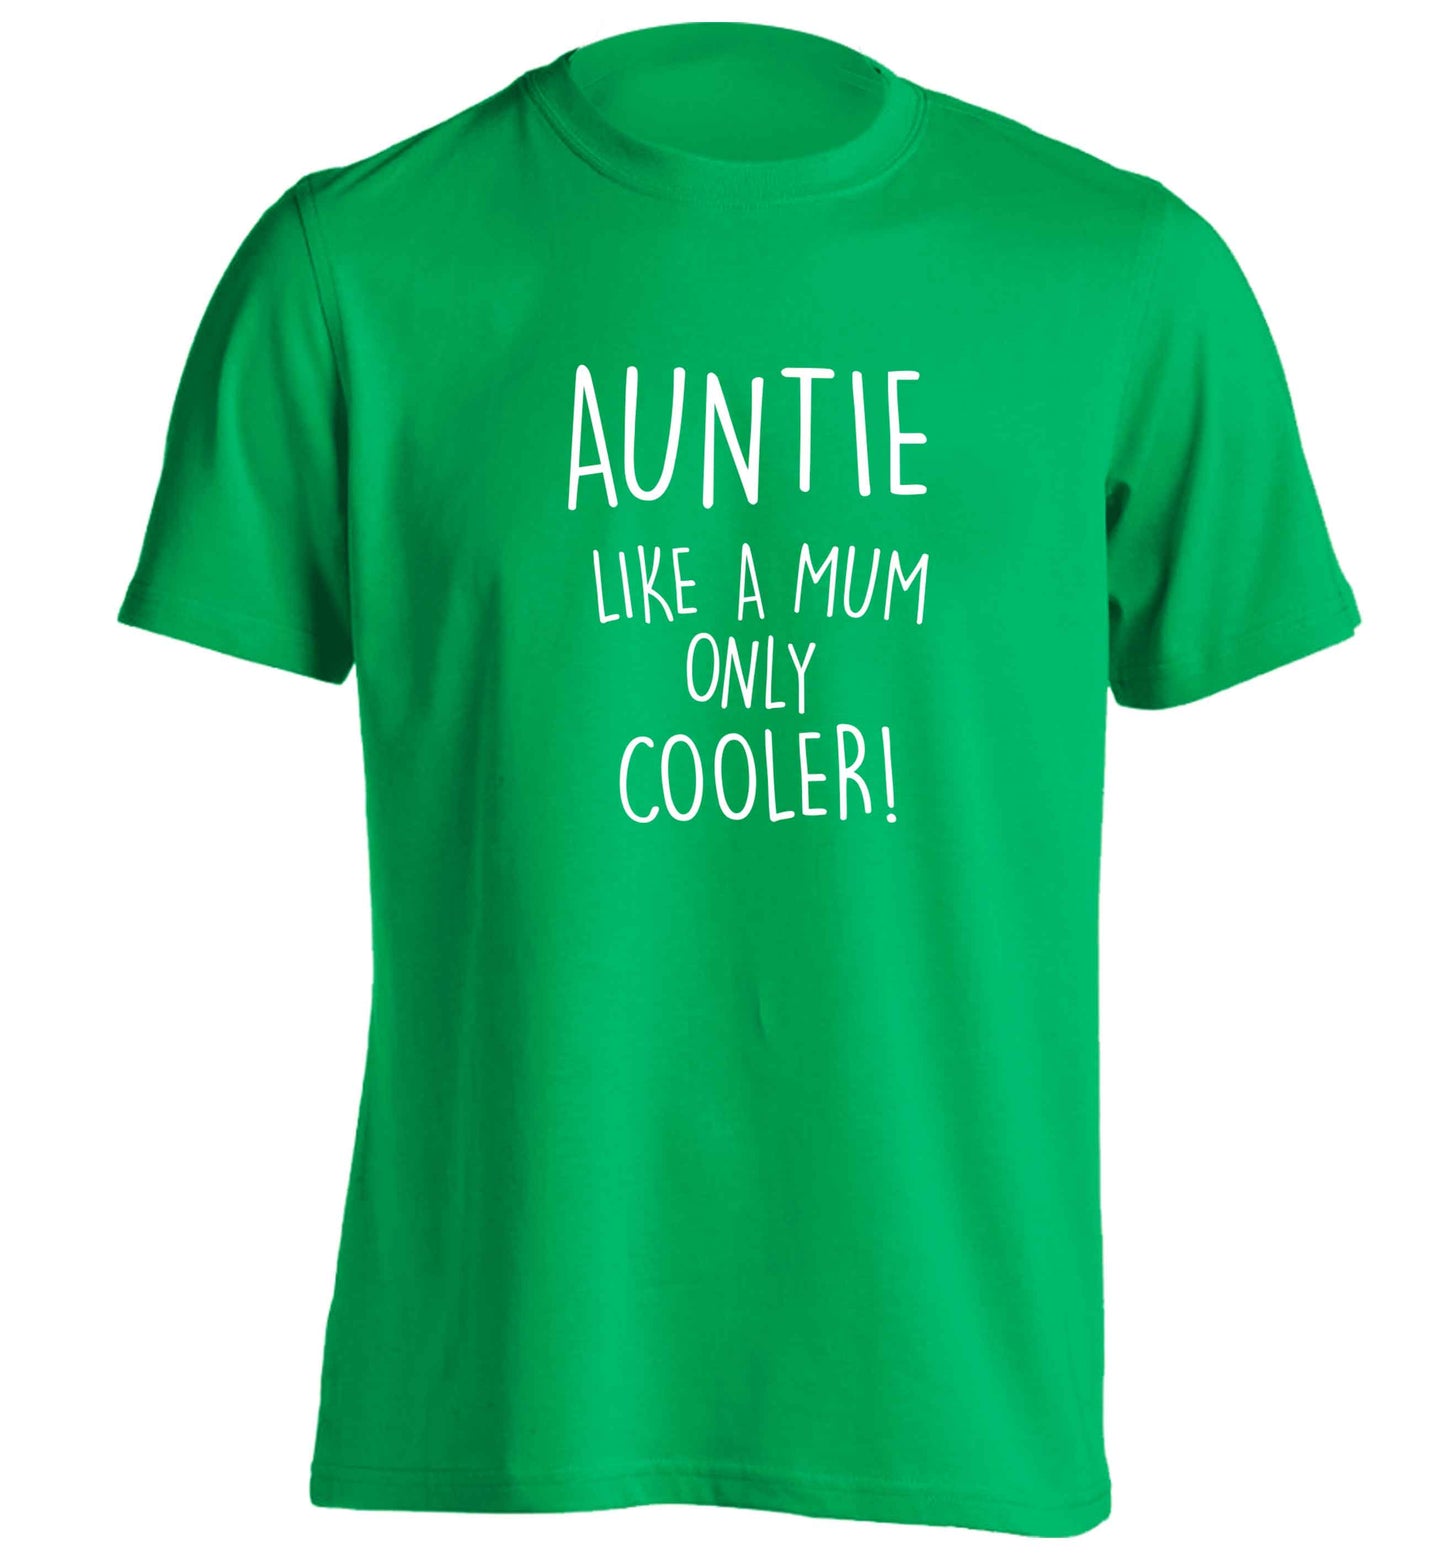 Auntie like a mum only cooler adults unisex green Tshirt 2XL